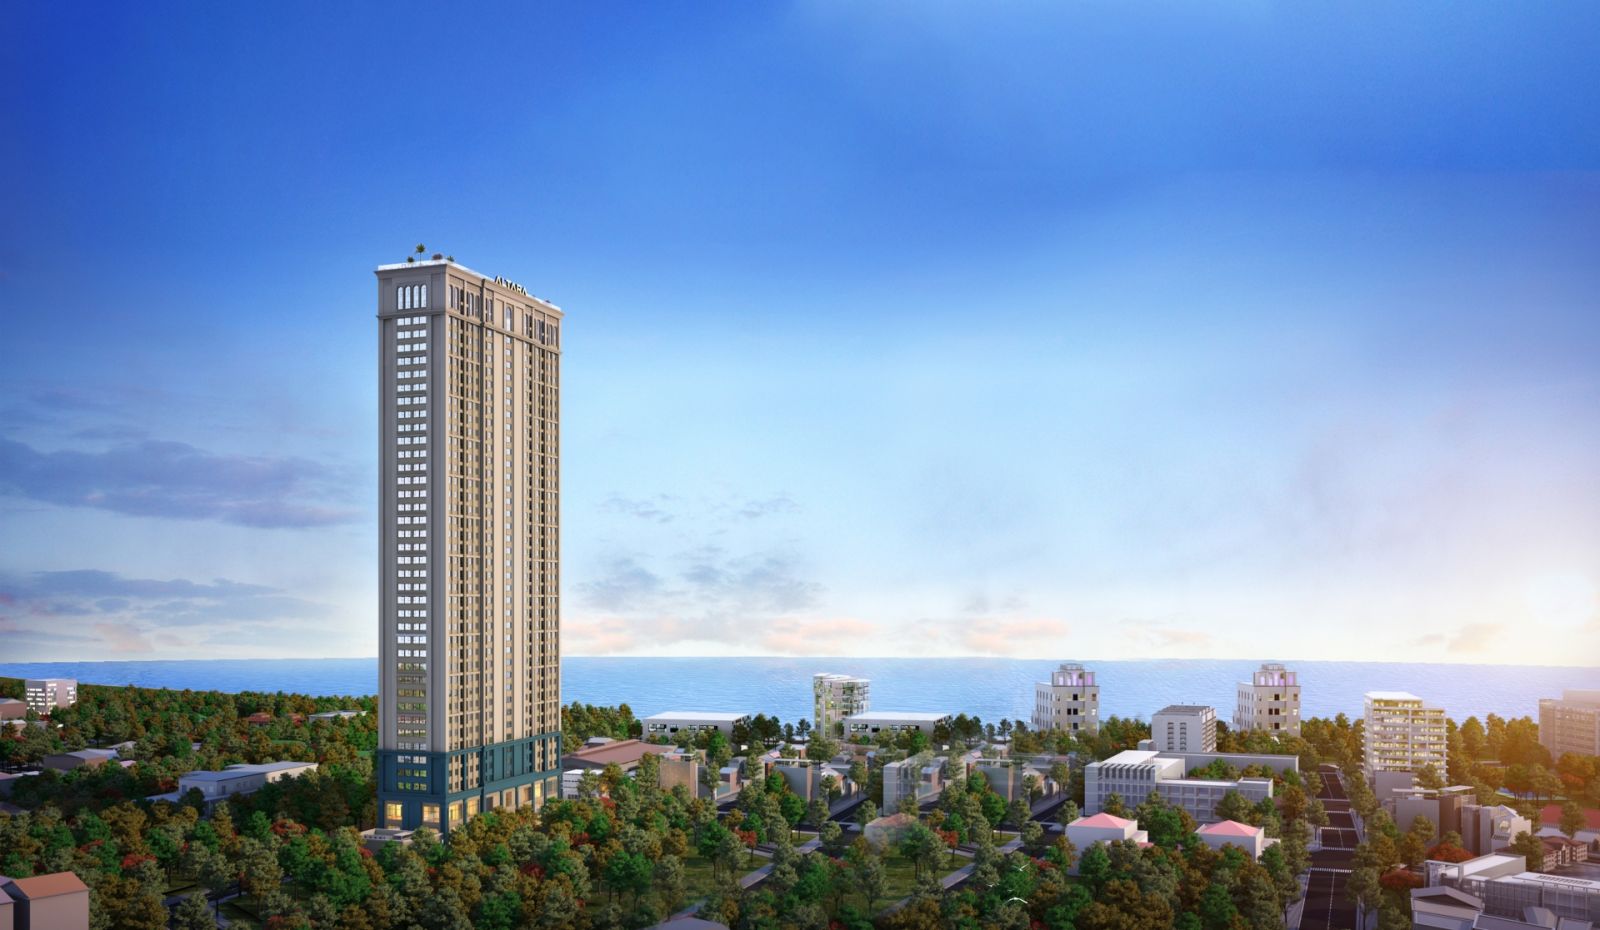 Altara Residences will be an outstanding real estate project offering unparalleled quality in Quy Nhon city of the central province of Binh Dinh.